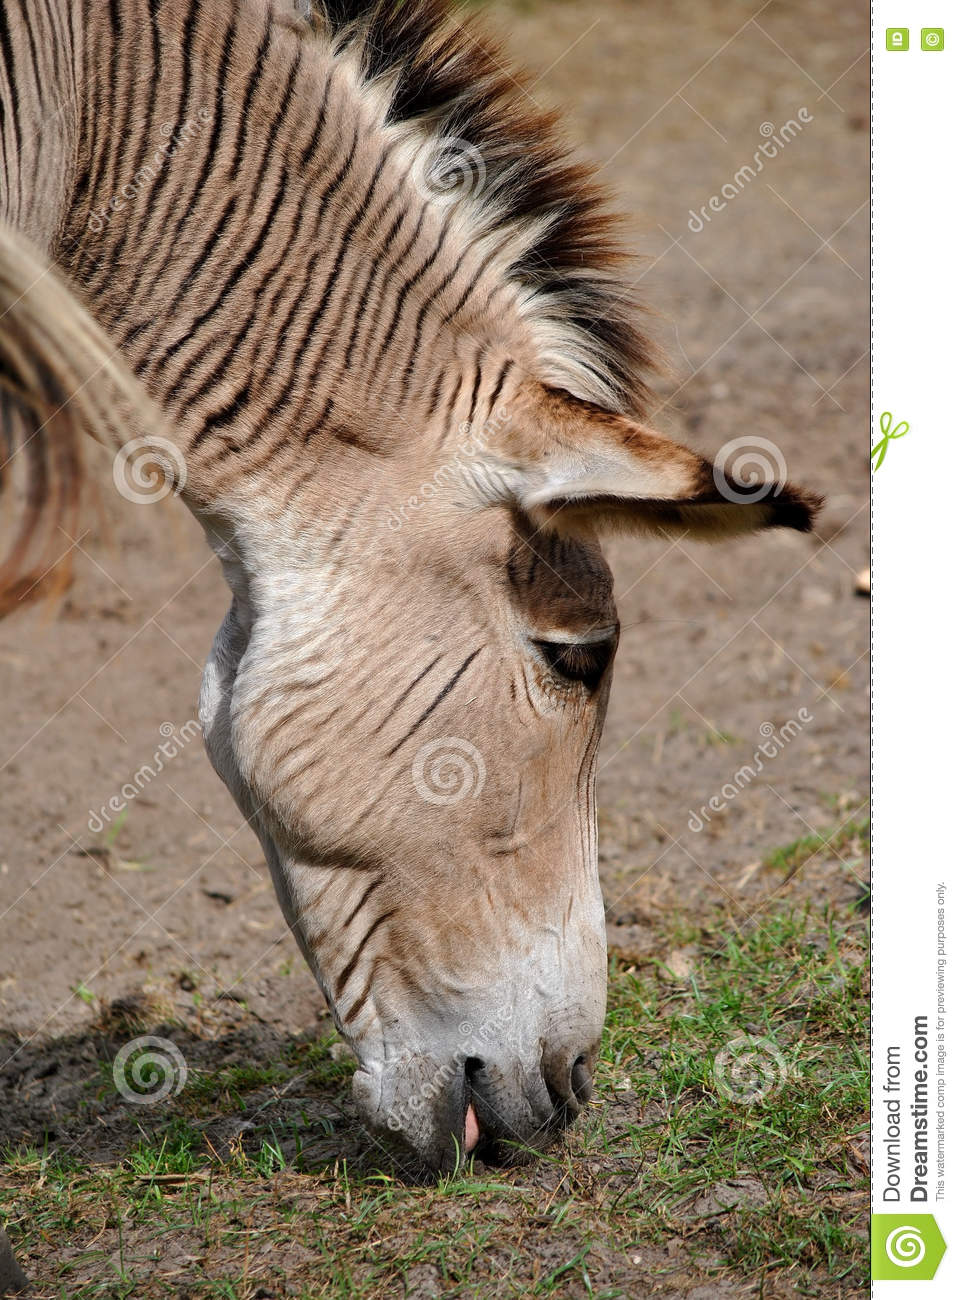 Zebroid clipart #19, Download drawings